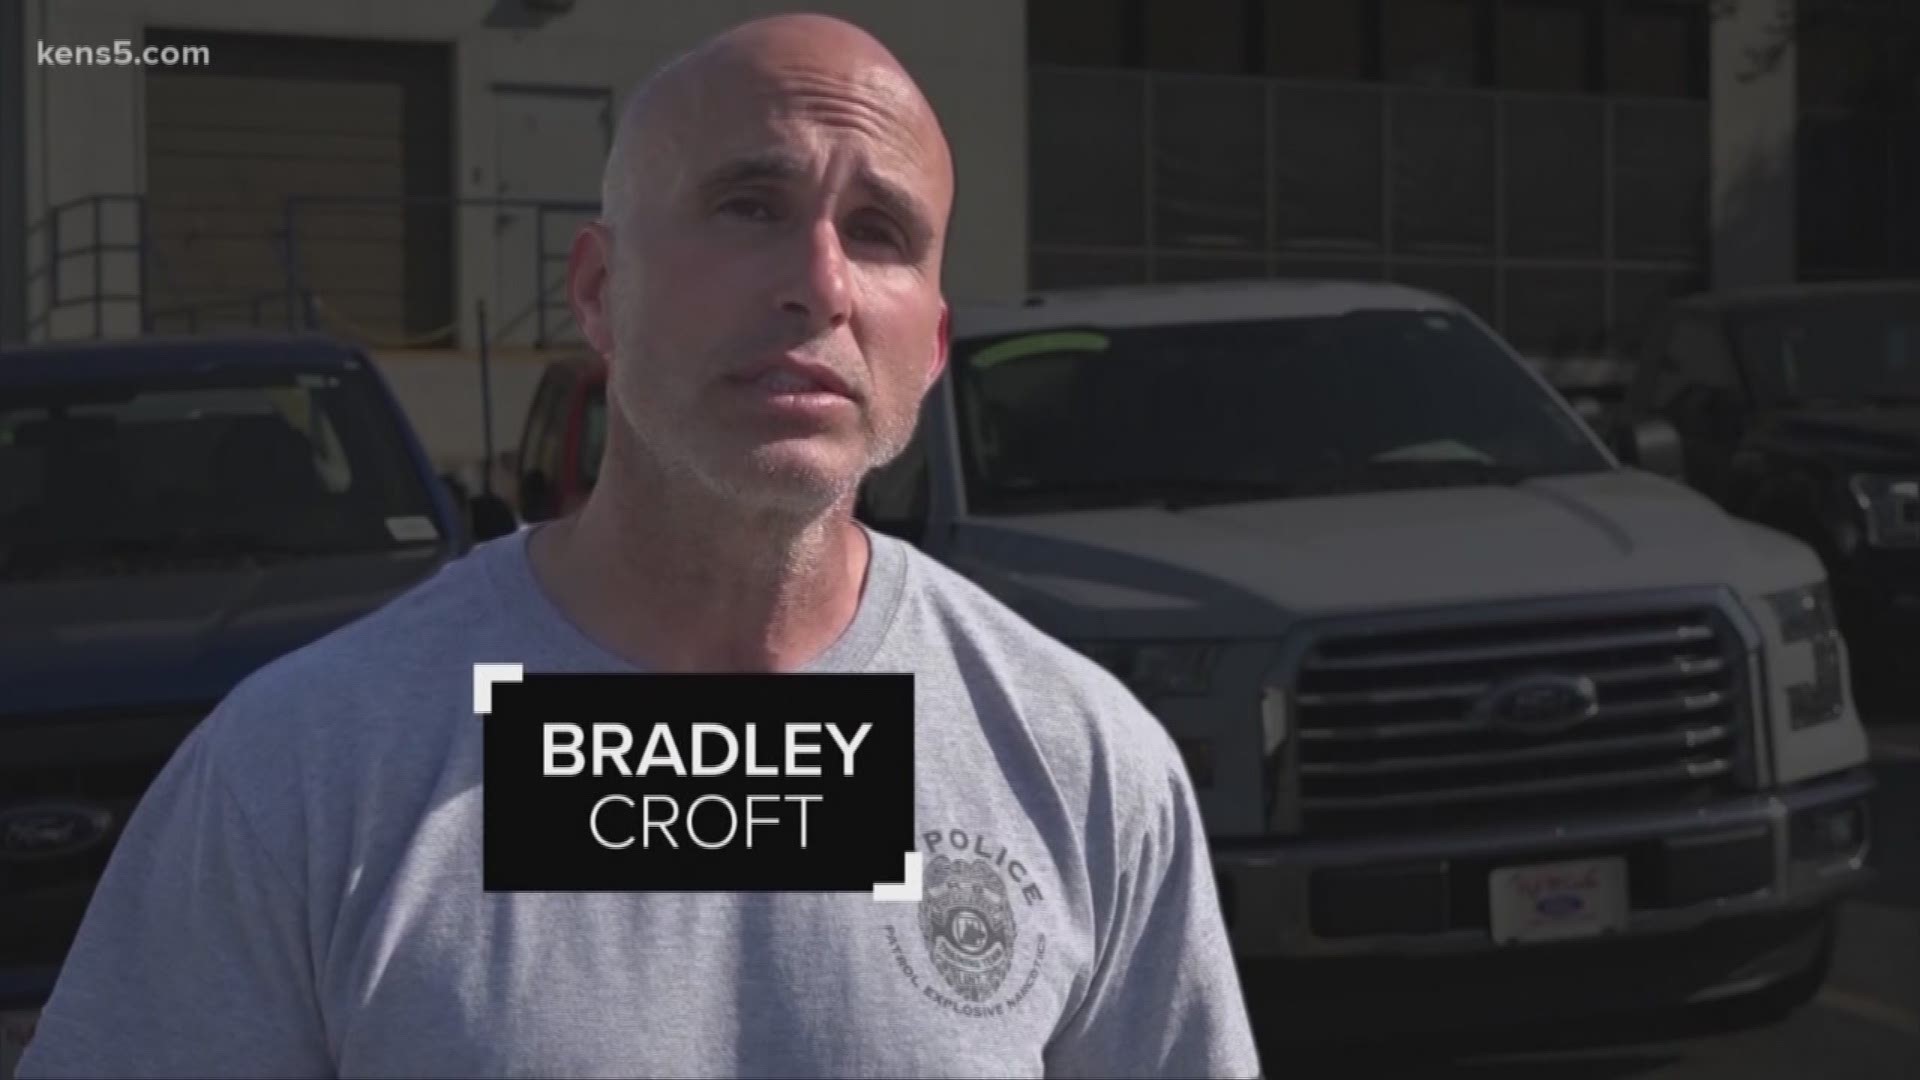 Bradley Croft, who owns Universal K-9, is charged with wire fraud, identity theft, money laundering and making a false tax return.